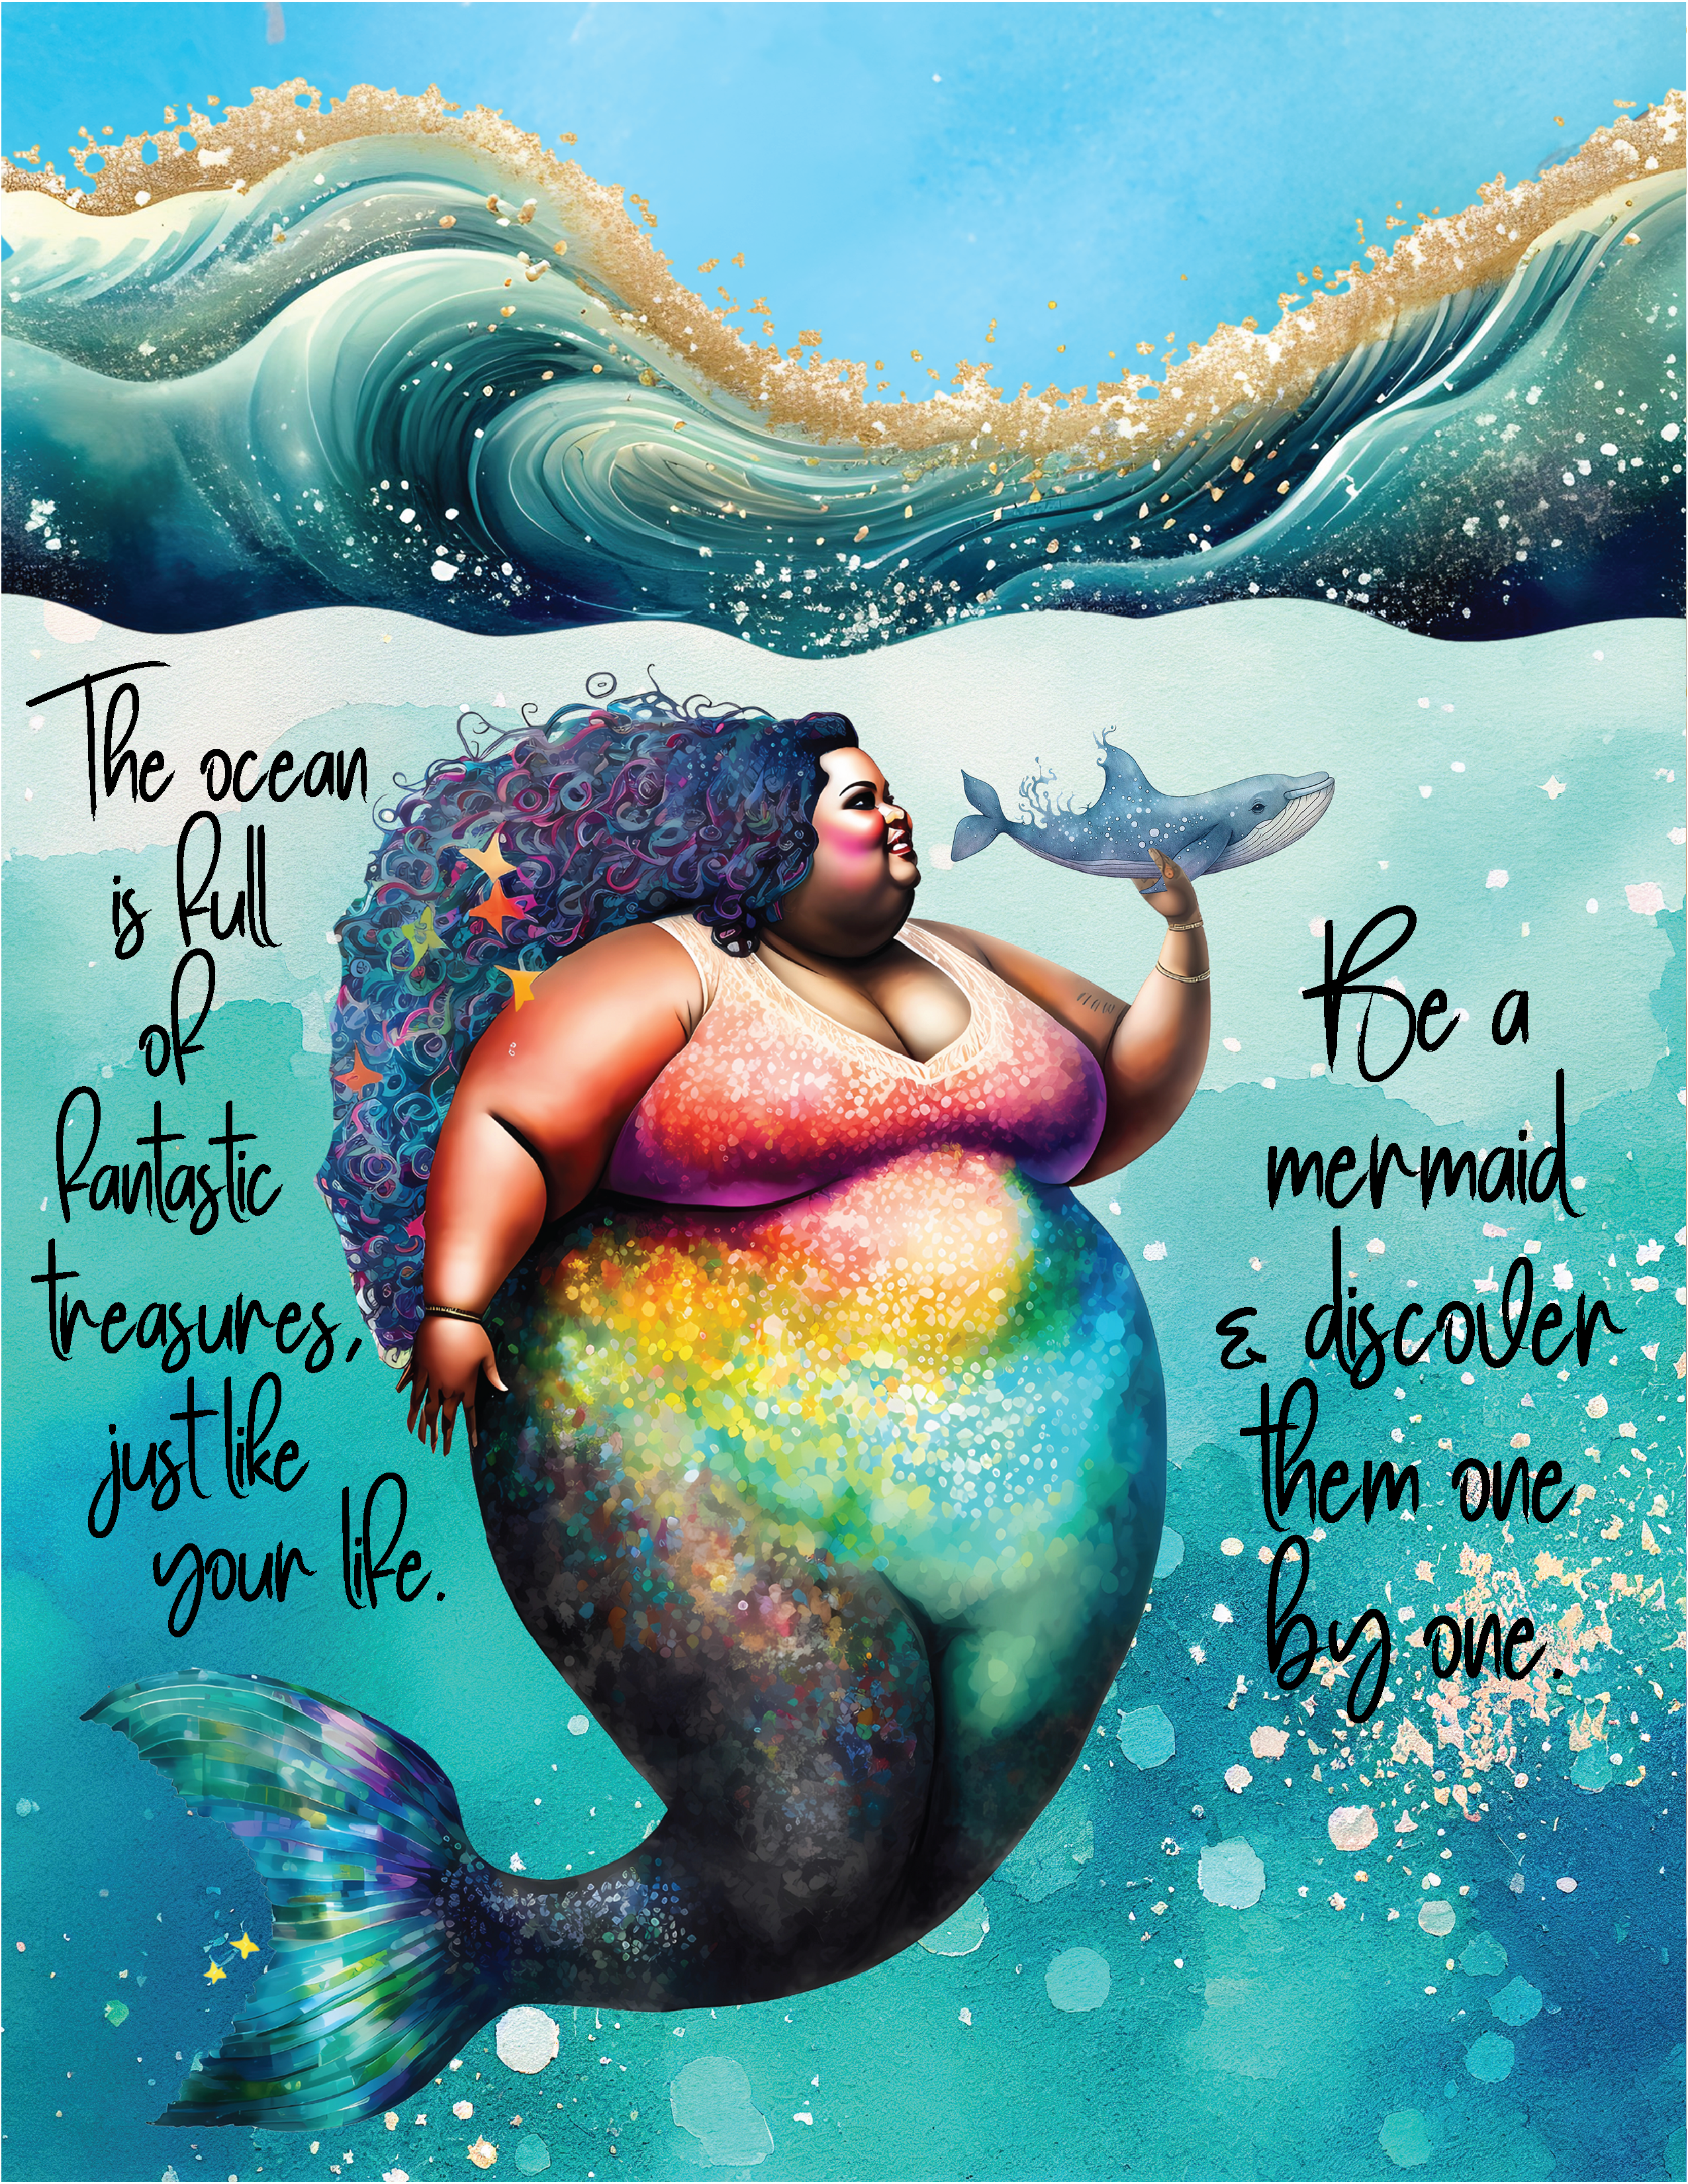 Beautiful mermaid looking at a little whale - Motivational Poster